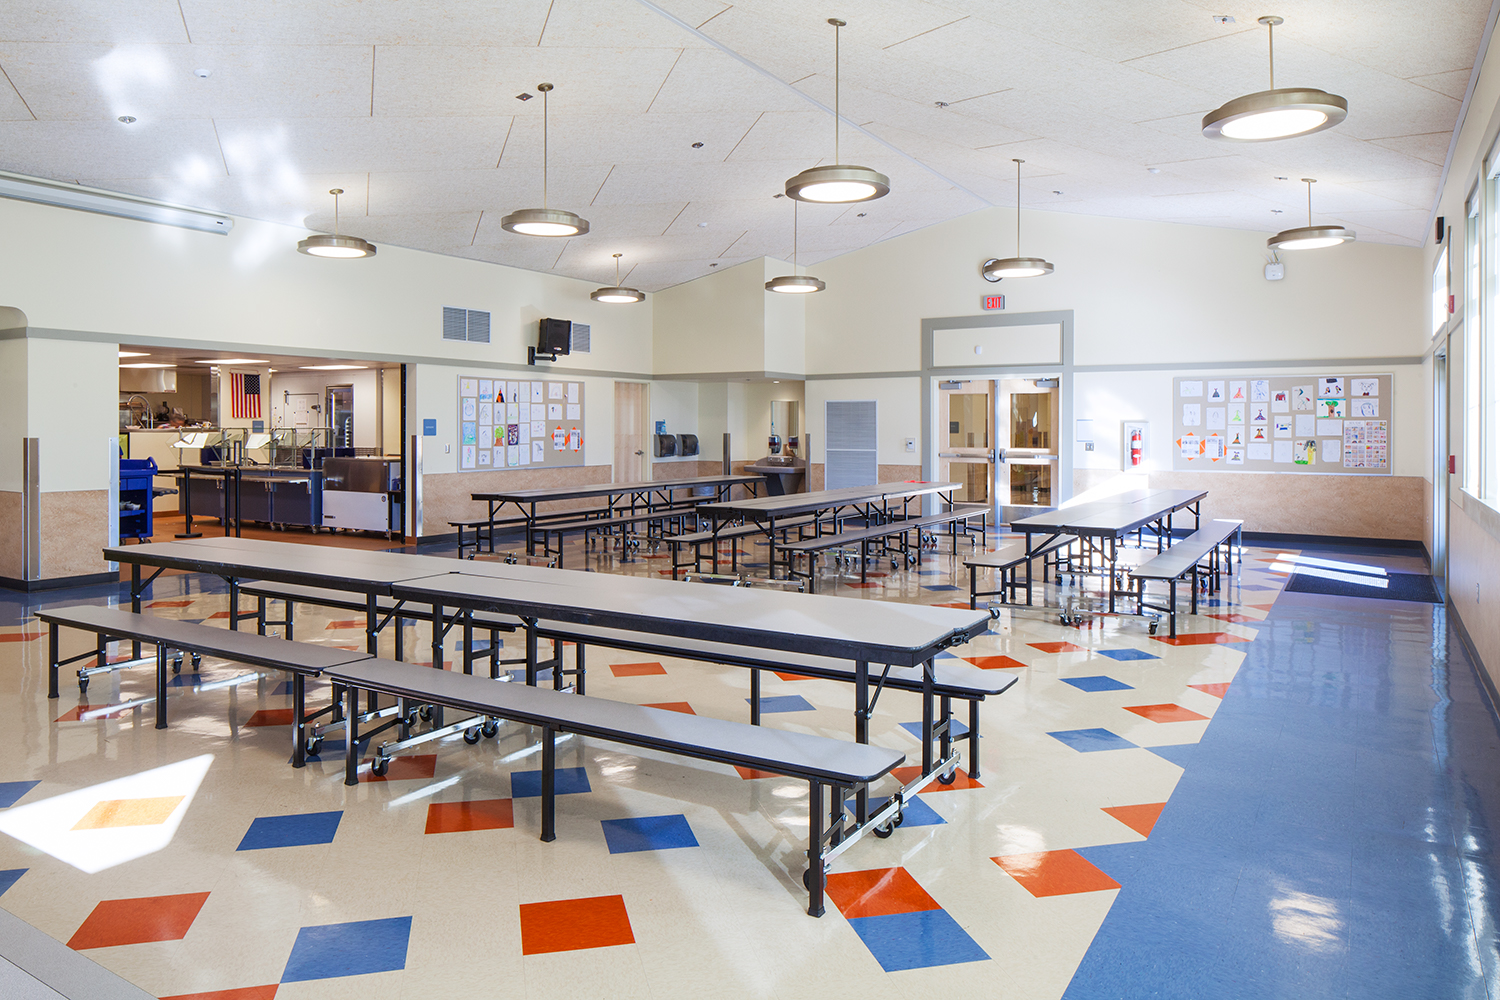 Broadway pendant luminaires as classroom lighting, hung over tables in a school cafeteria.